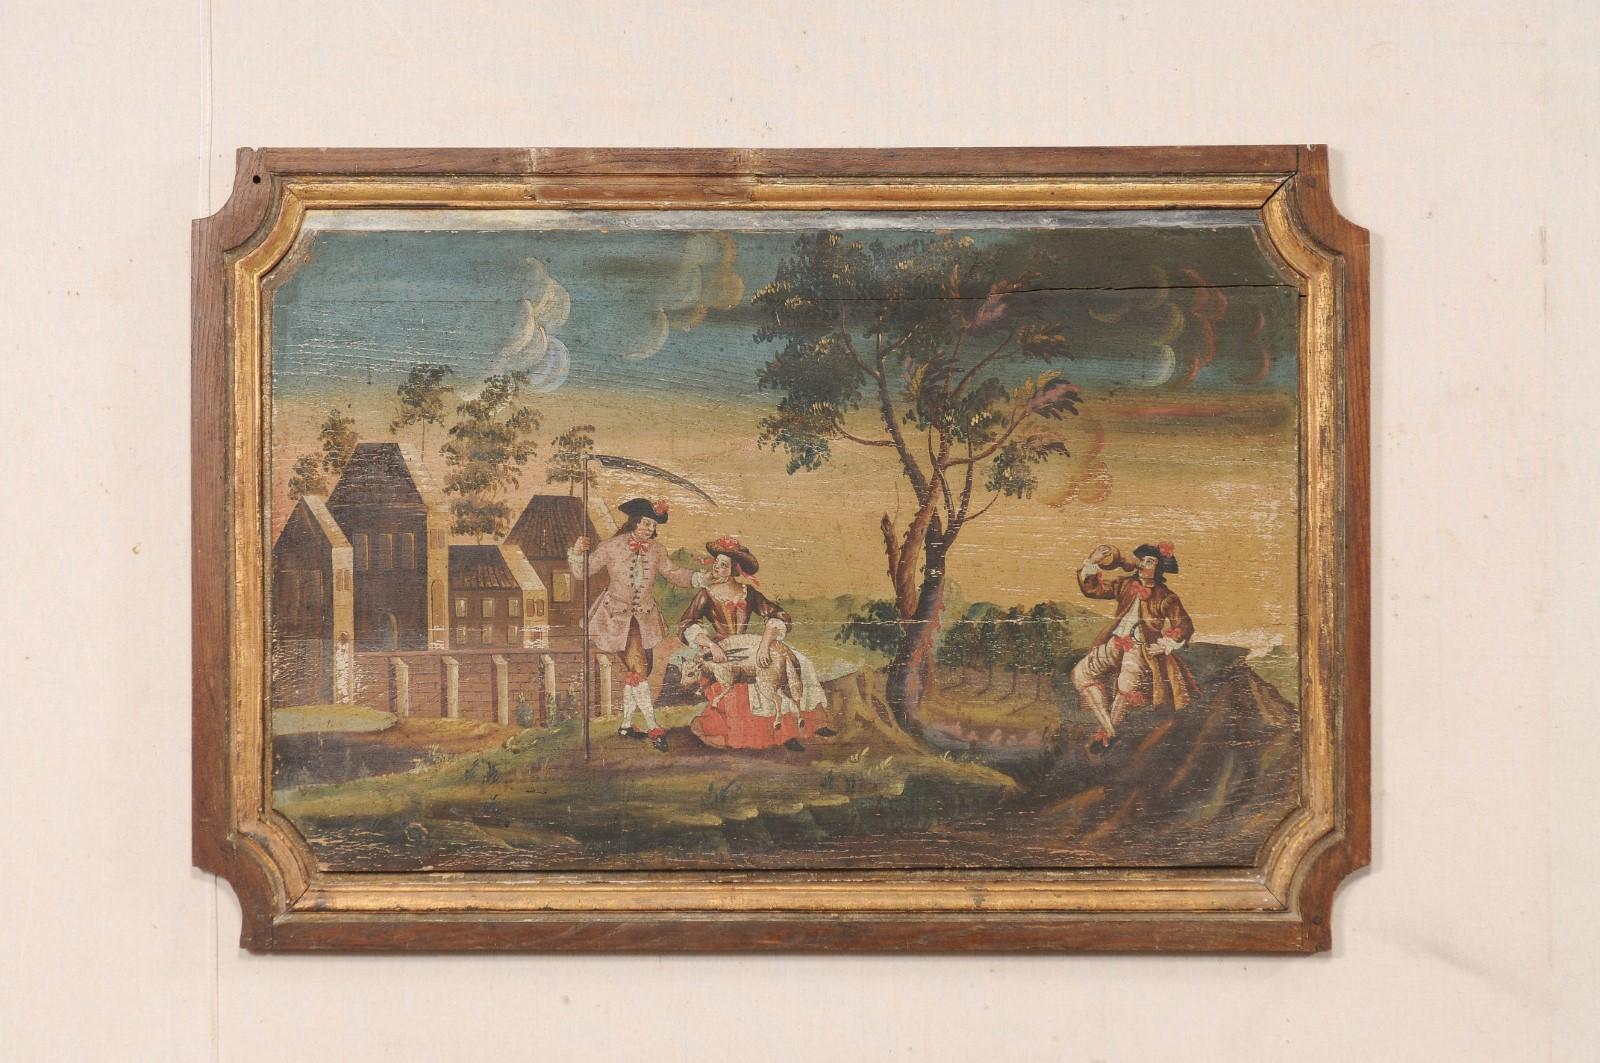 A large French landscape painted wooden wall panel from the 19th century, artist unknown. This antique wall decoration from France has been artisan painted and depicts a lady sheep sheering with a gentleman caressing her chin, as another drinks in